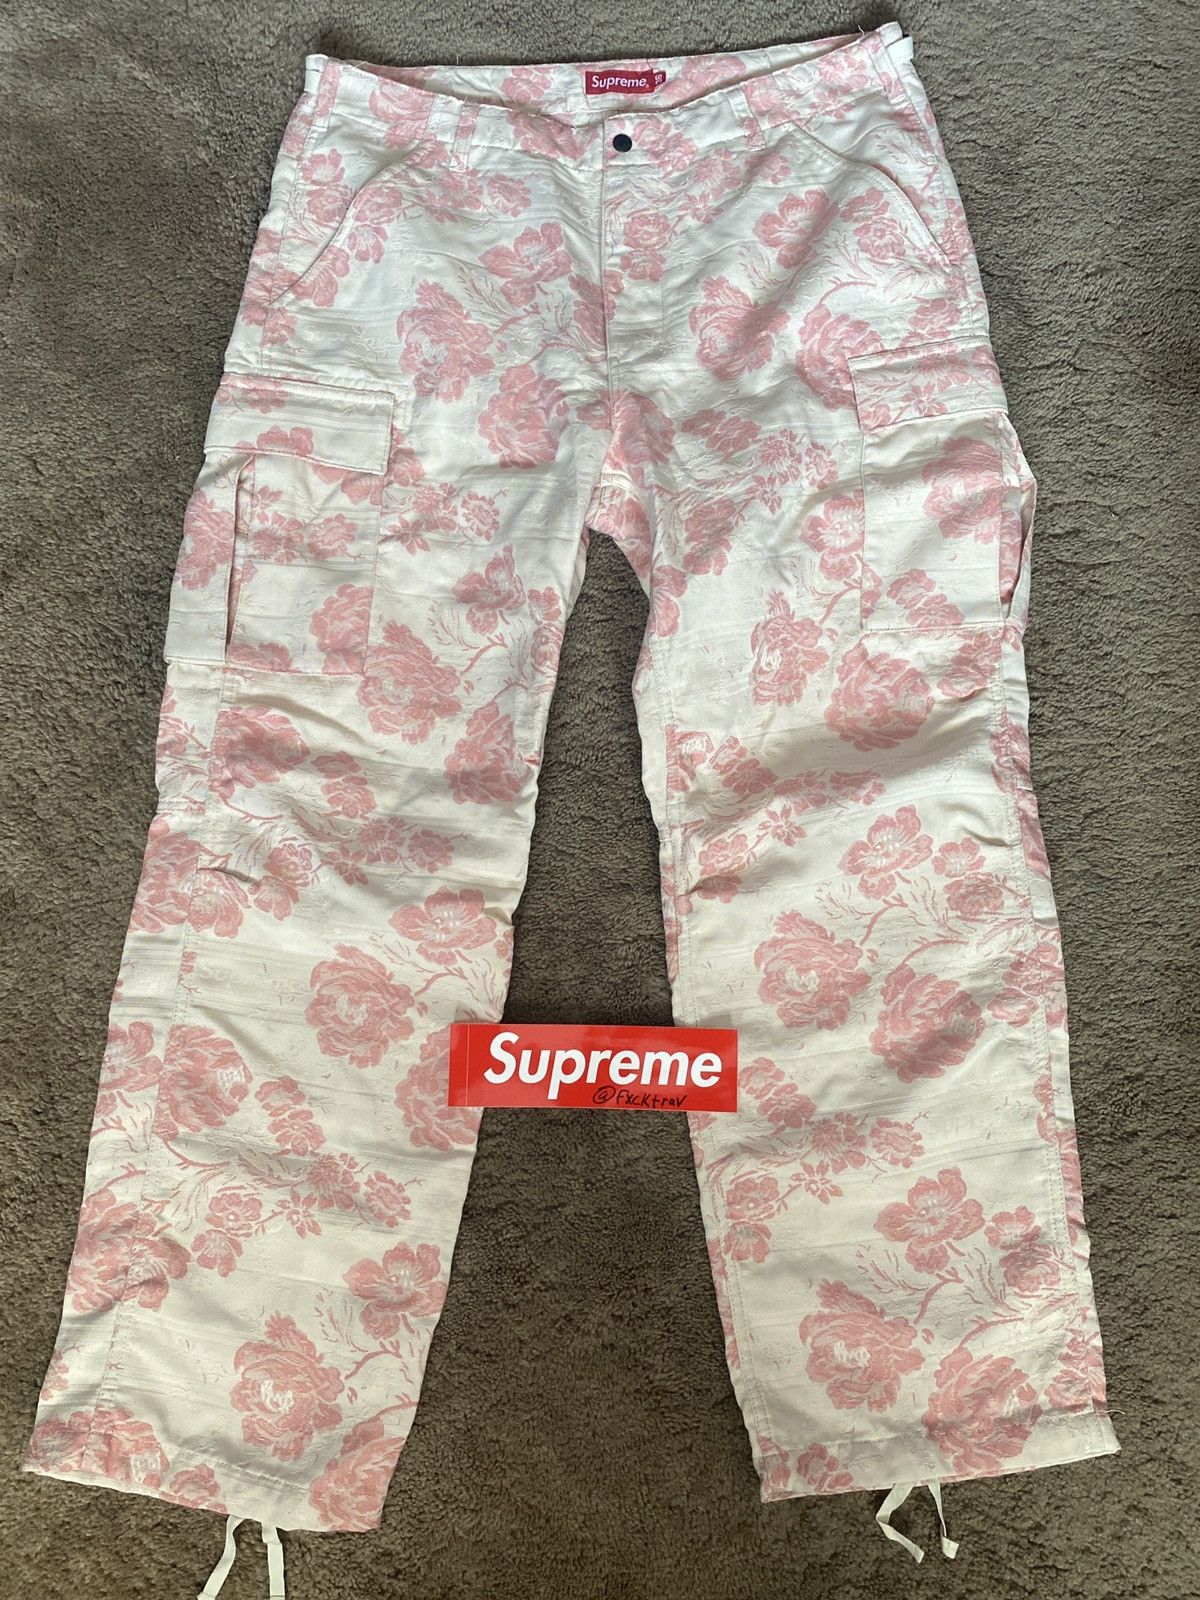 Supreme Supreme Floral tapestry cargo pant cream/pink | Grailed